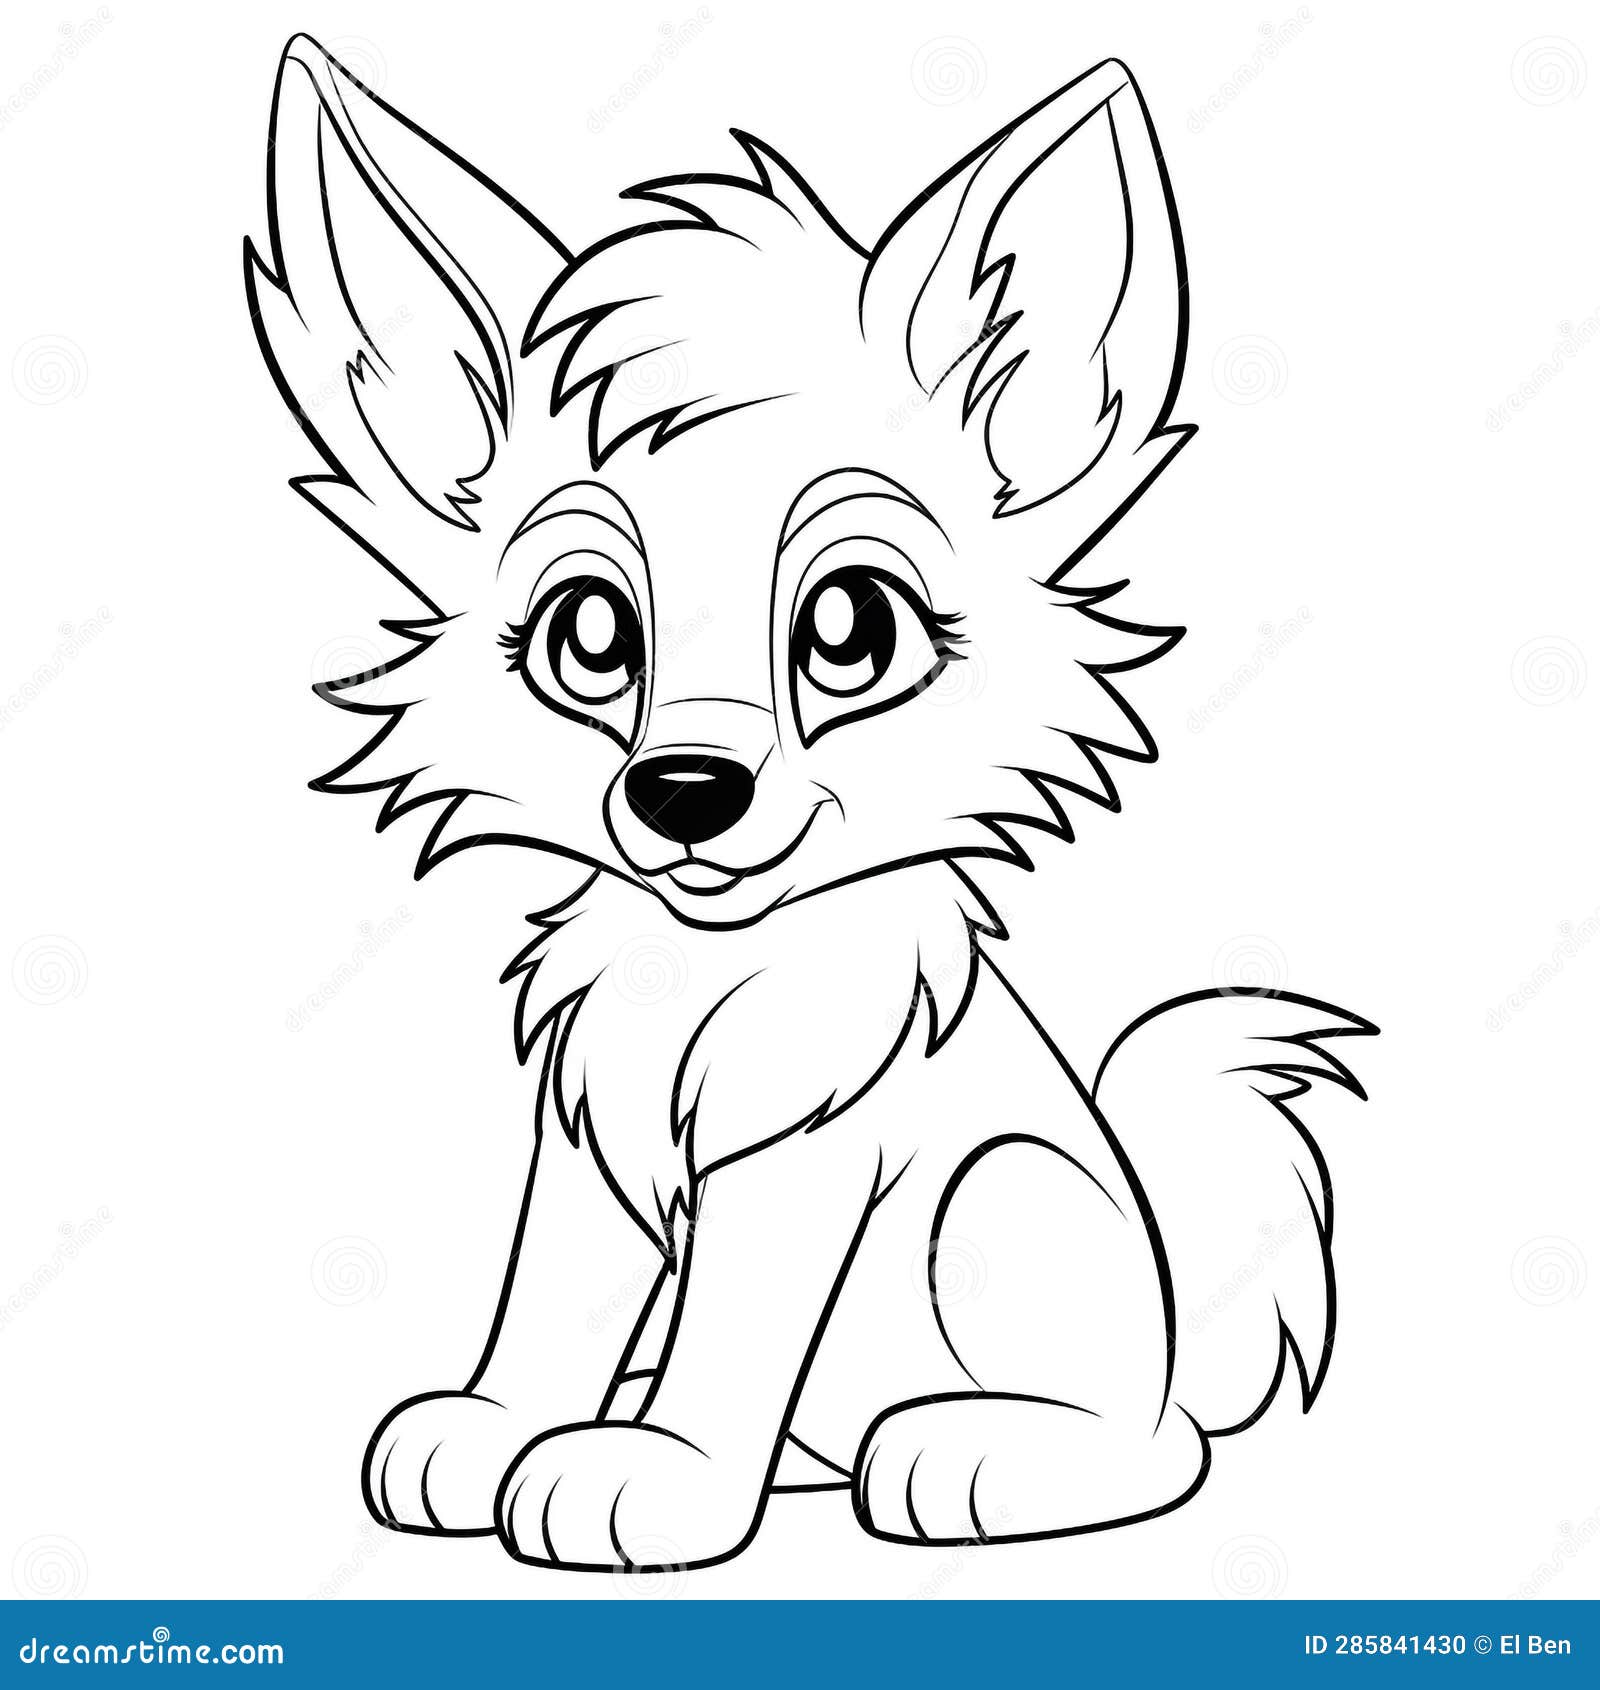 Cute Animal Coloring Page stock illustration. Illustration of animal ...